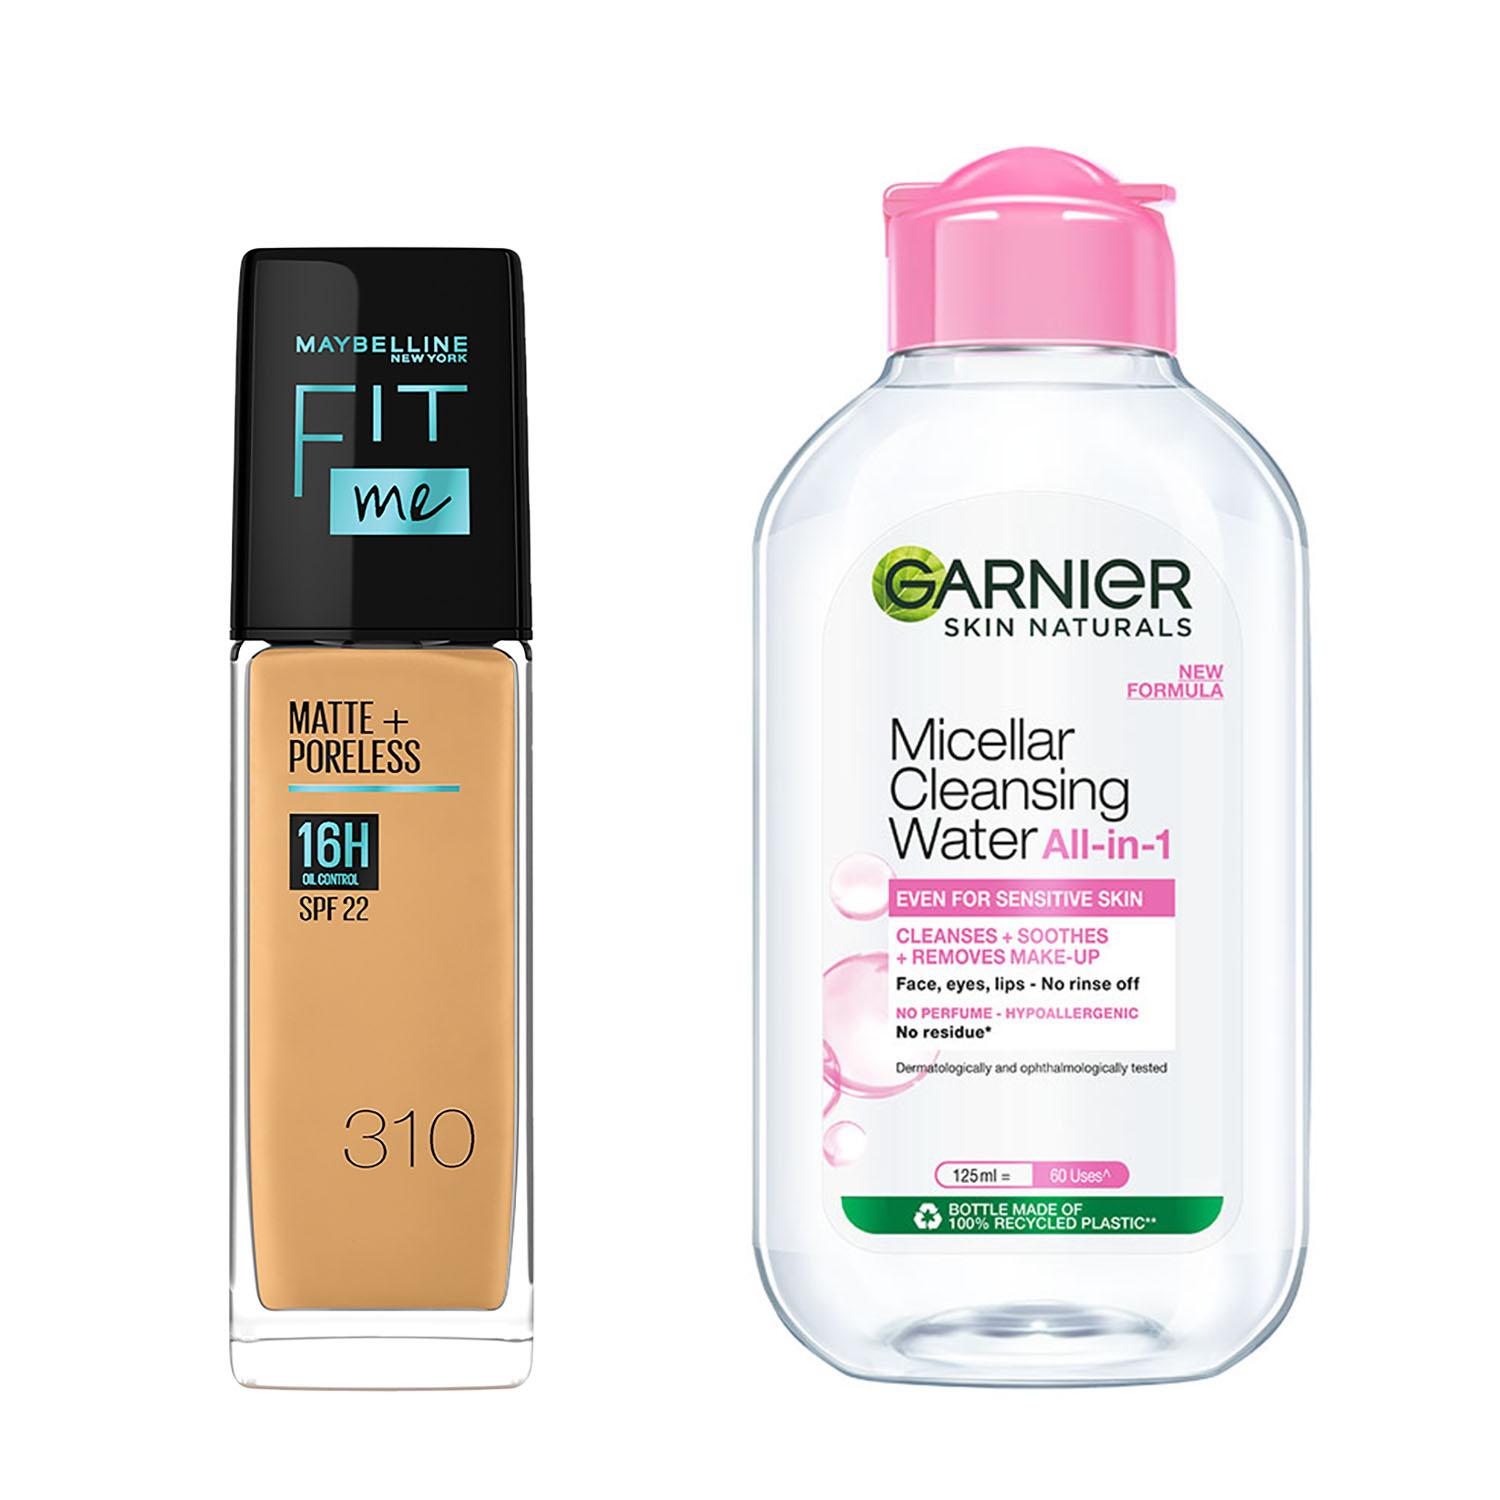 Maybelline New York Fit Me Liquid Foundation, 310 with Garnier Micellar Cleansing Water Combo